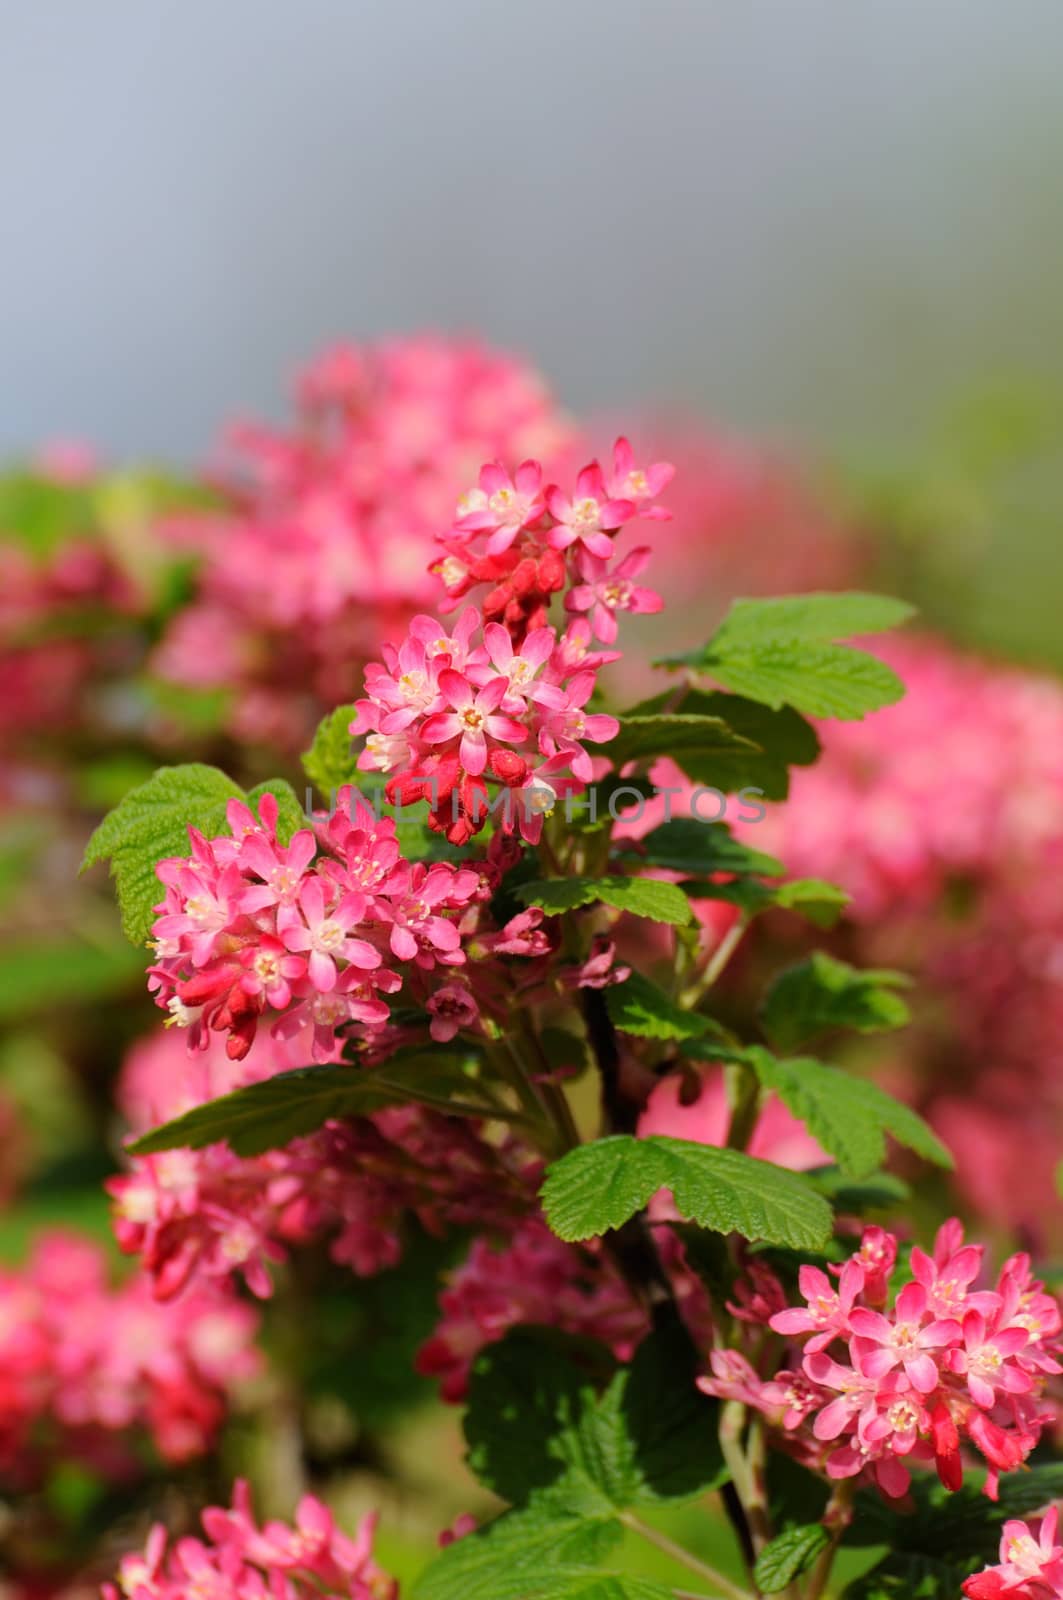 Tree branch with small pink flowers in Fulda, Hessen, Germany